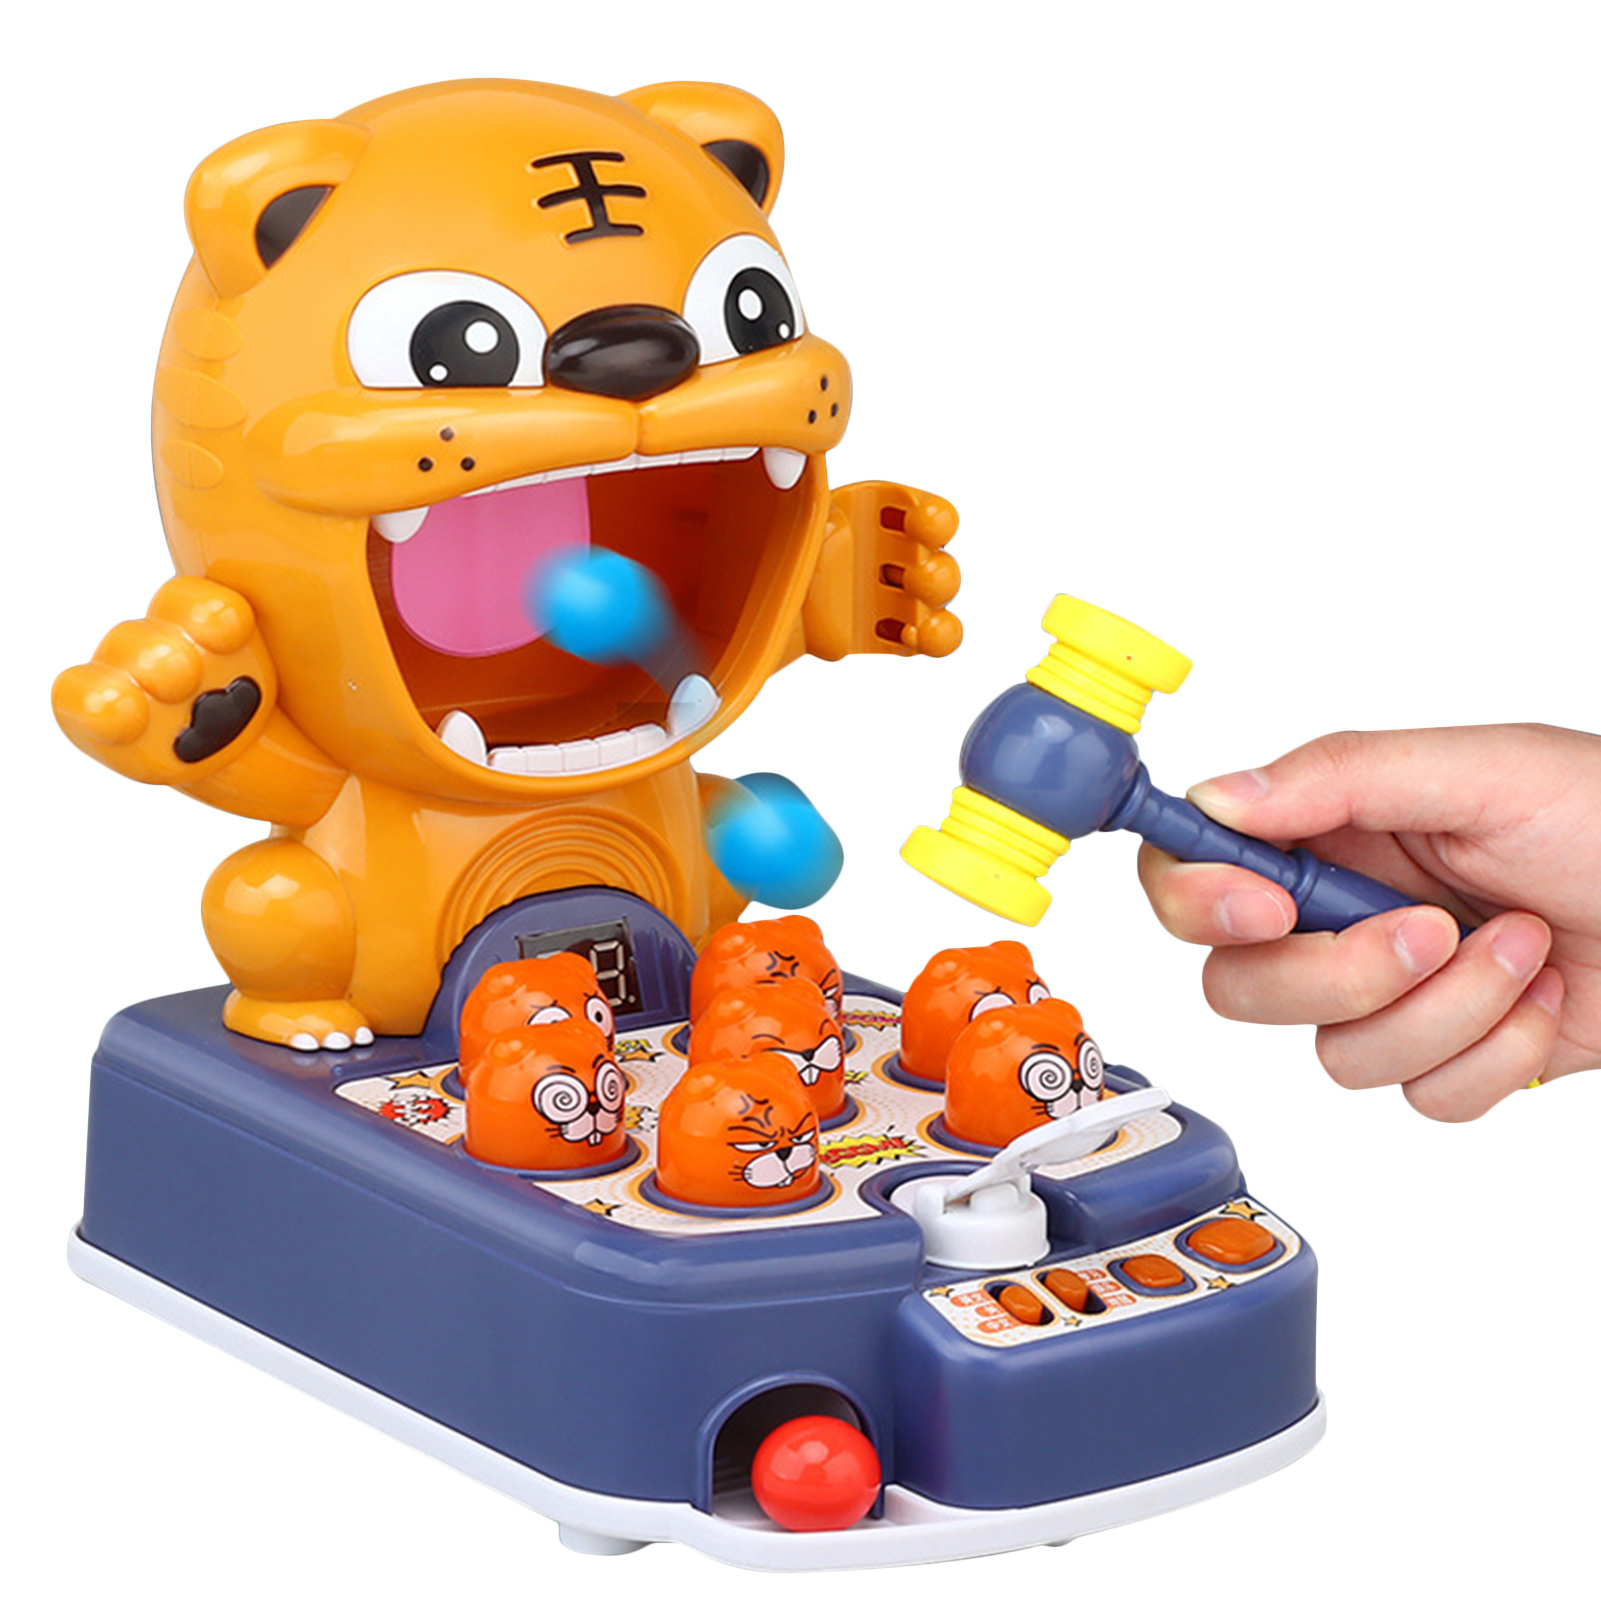 Whack A-Mole Game Mini Electronic Arcade Game Pounding Toy Light Musical Hit The Mole Interactive Toy Gift For Boys Girls